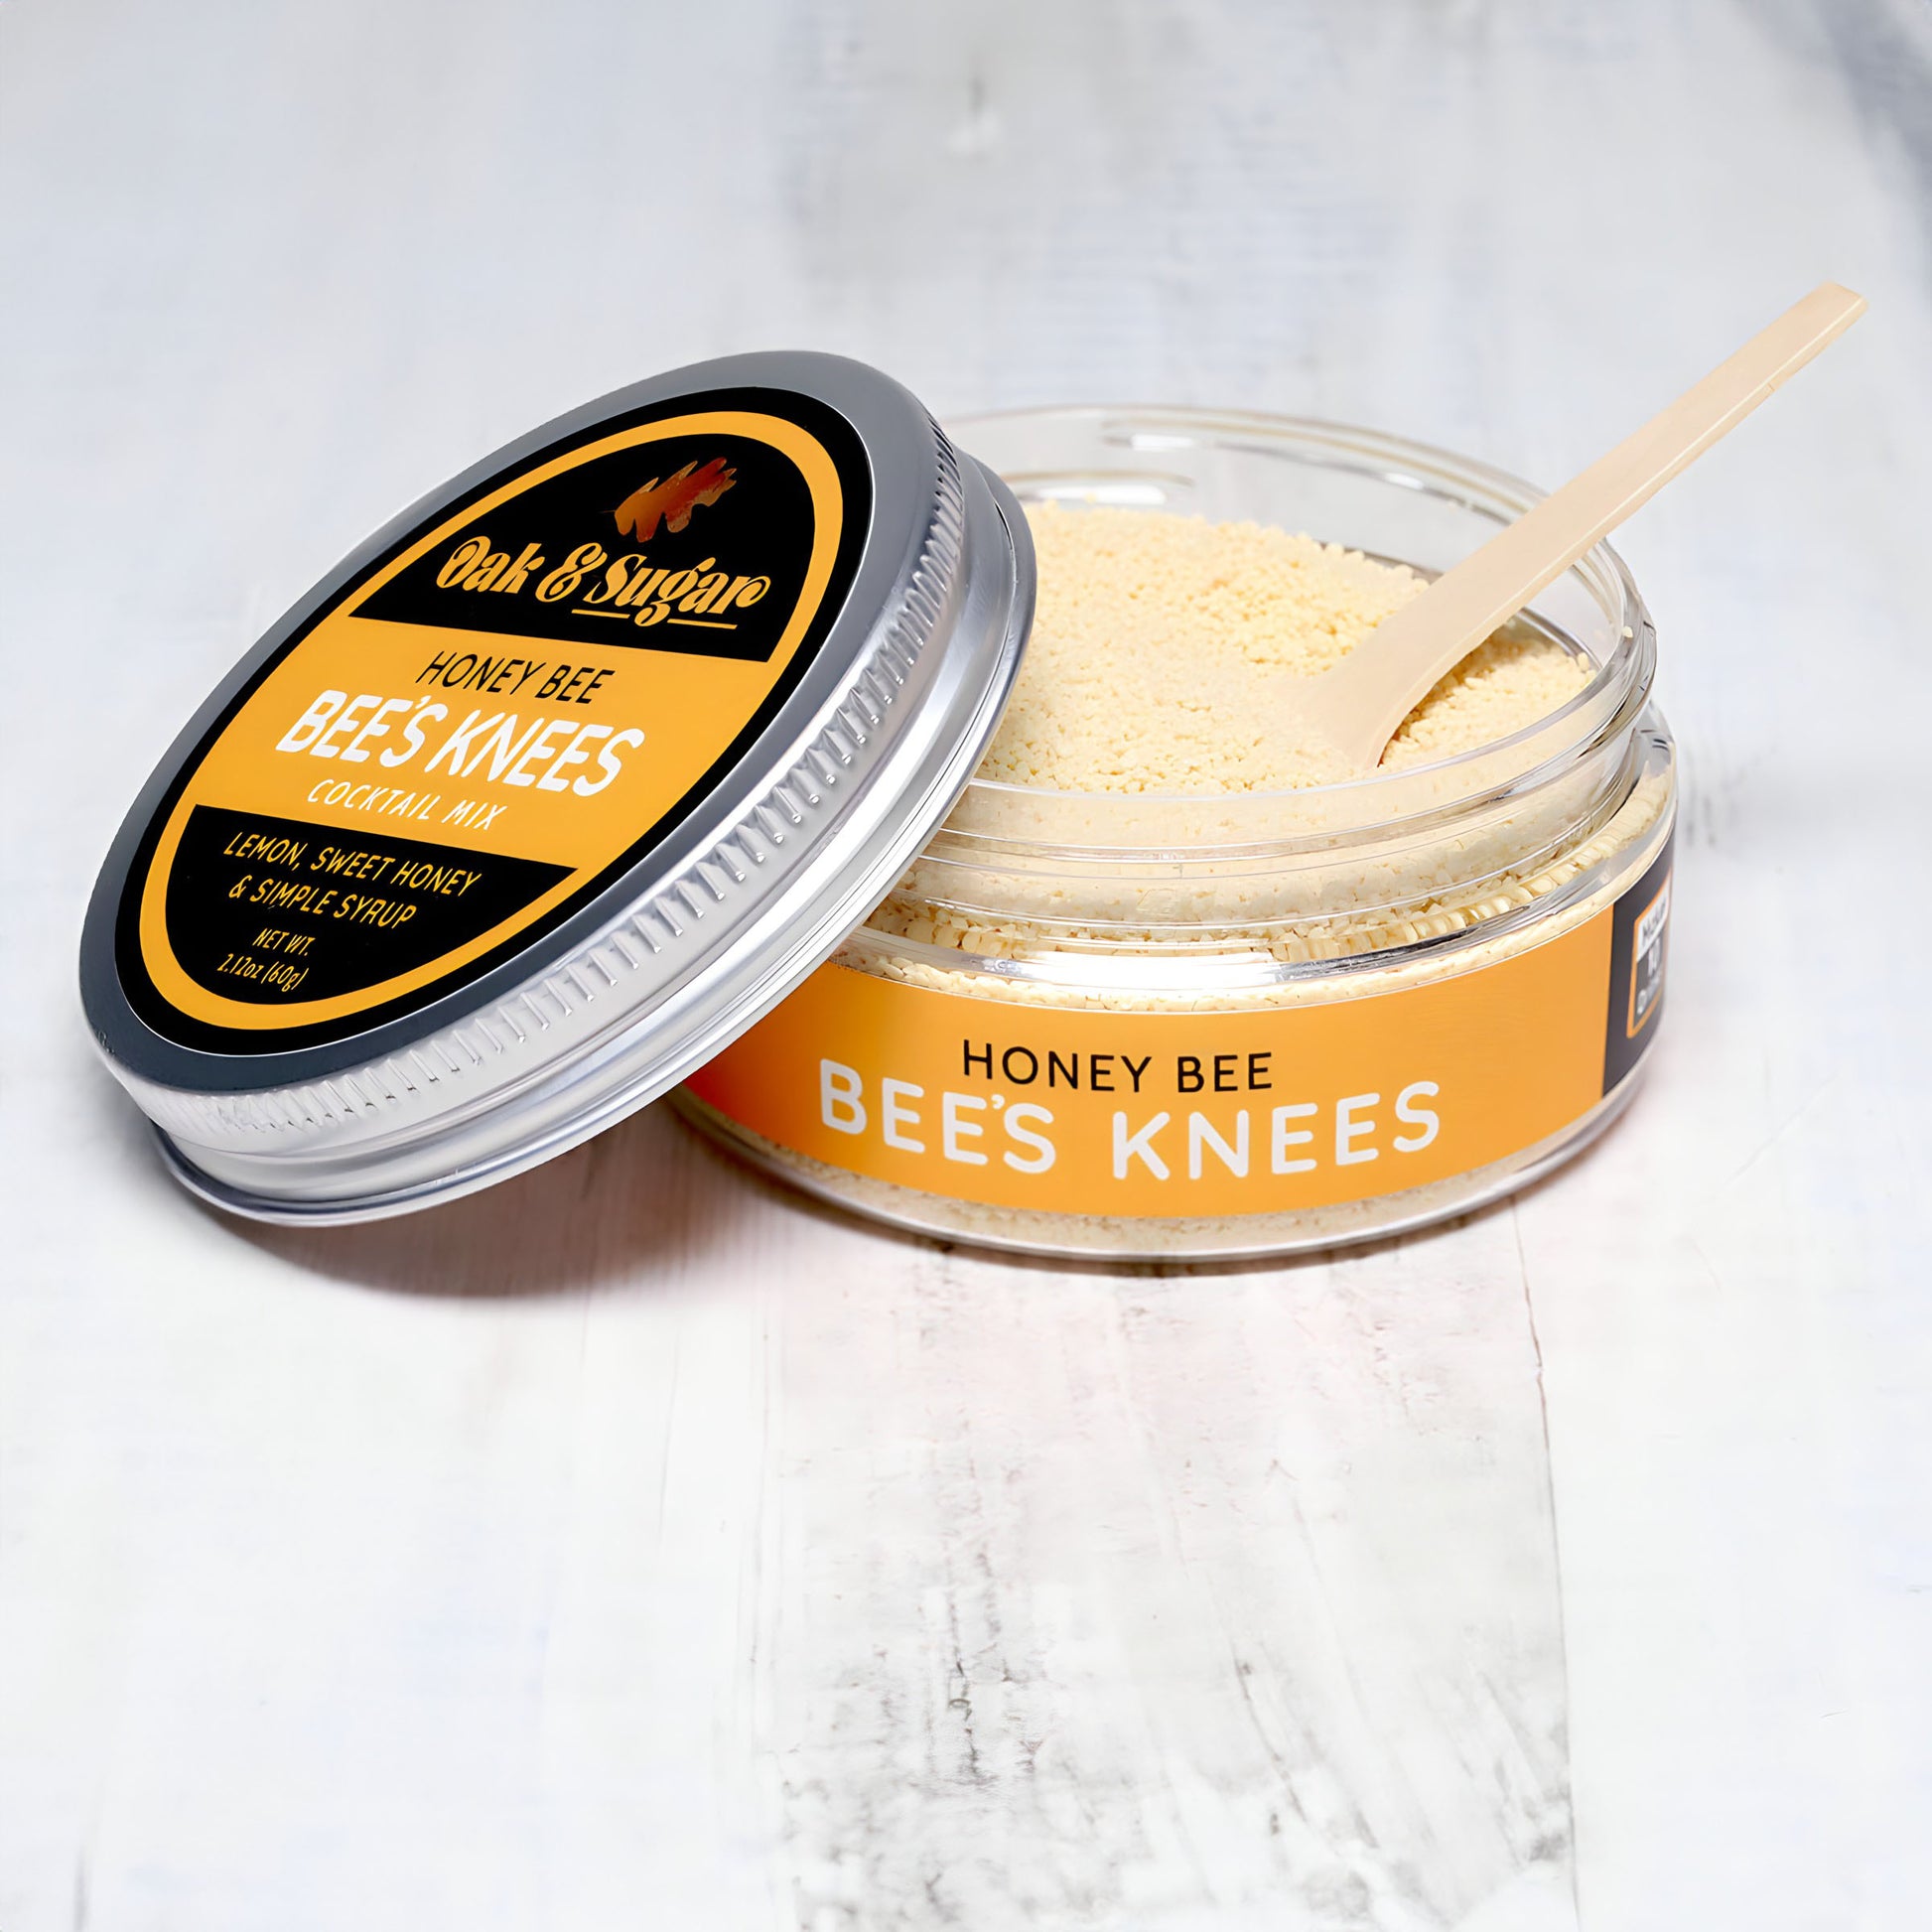 Honey Bee Bee's Knees Cocktail Mix (10 servings) | Oak & Sugar | Nostalgic for the Prohibition days? Try an Oak & Sugar Honey Bee Bee's Knees, a clever mix of gin, honey simple syrup, and lemon tartness that will transport you to a time when drinks were e